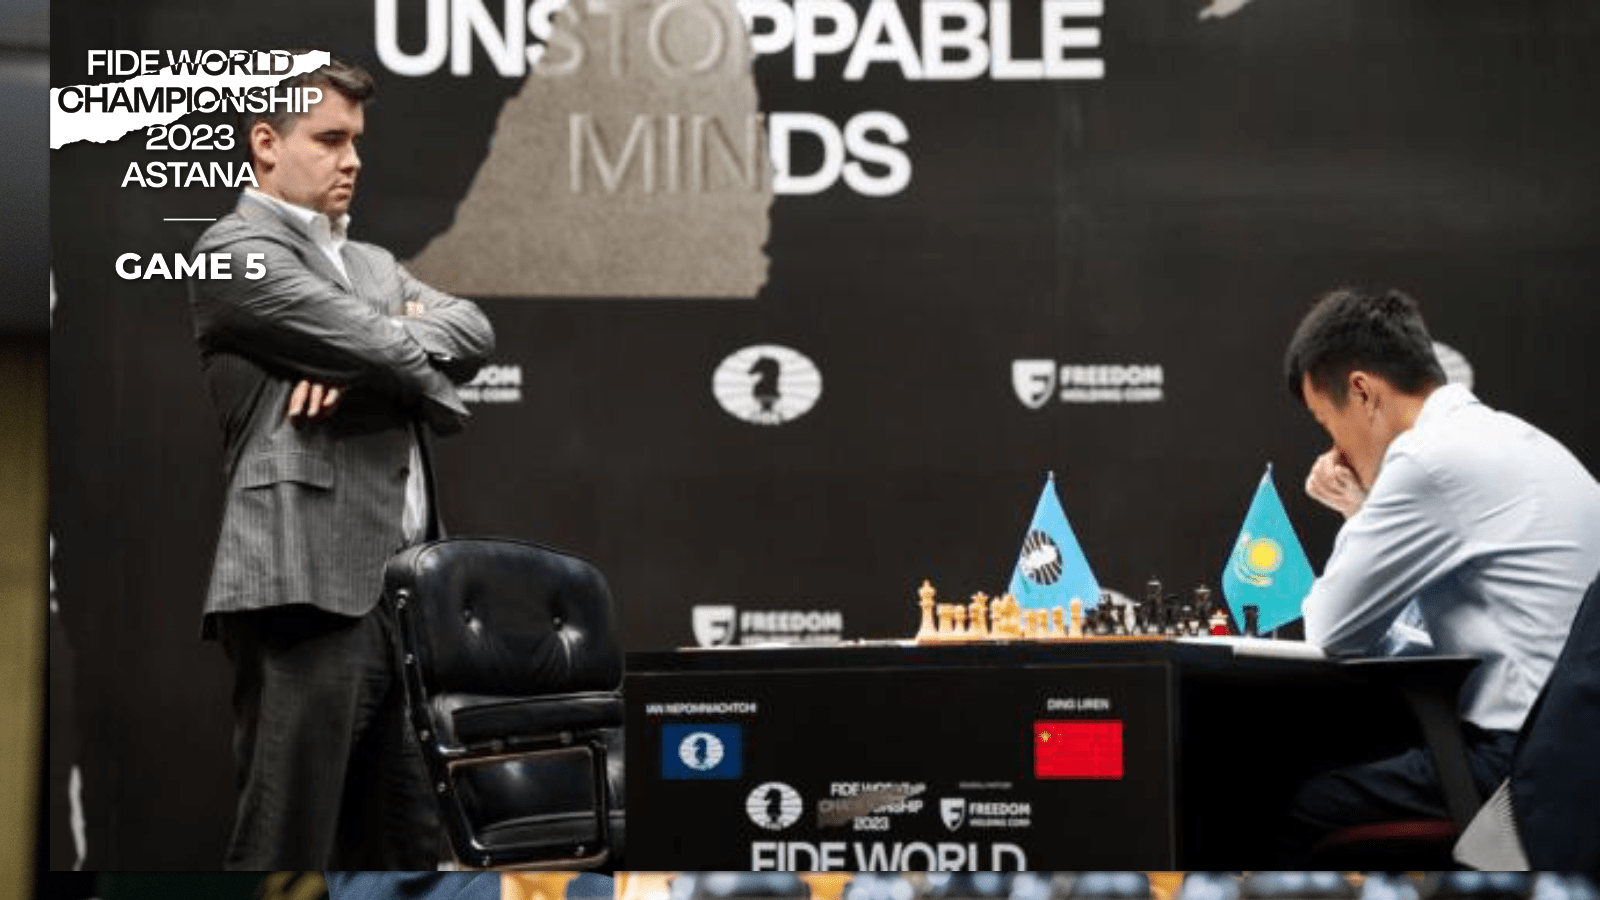 The penultimate round of the @fide_chess World Chess Championship match  2023 between Ian Nepomniachtchi and Ding Liren ended in a draw.…